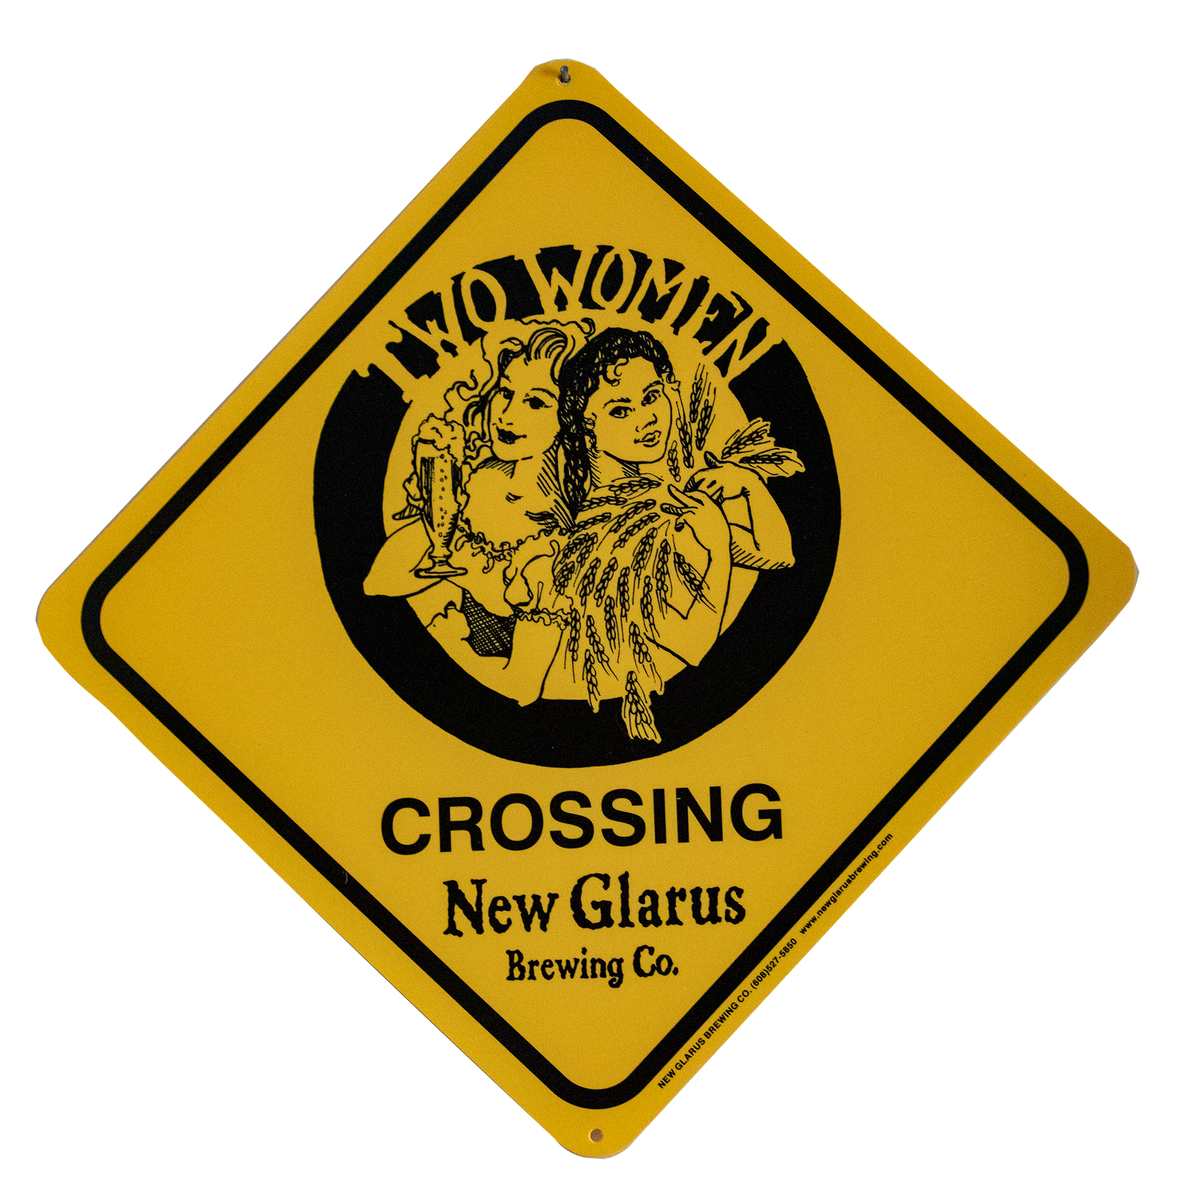 Bright yellow crossing sign with circular Two Women logo in black ink.